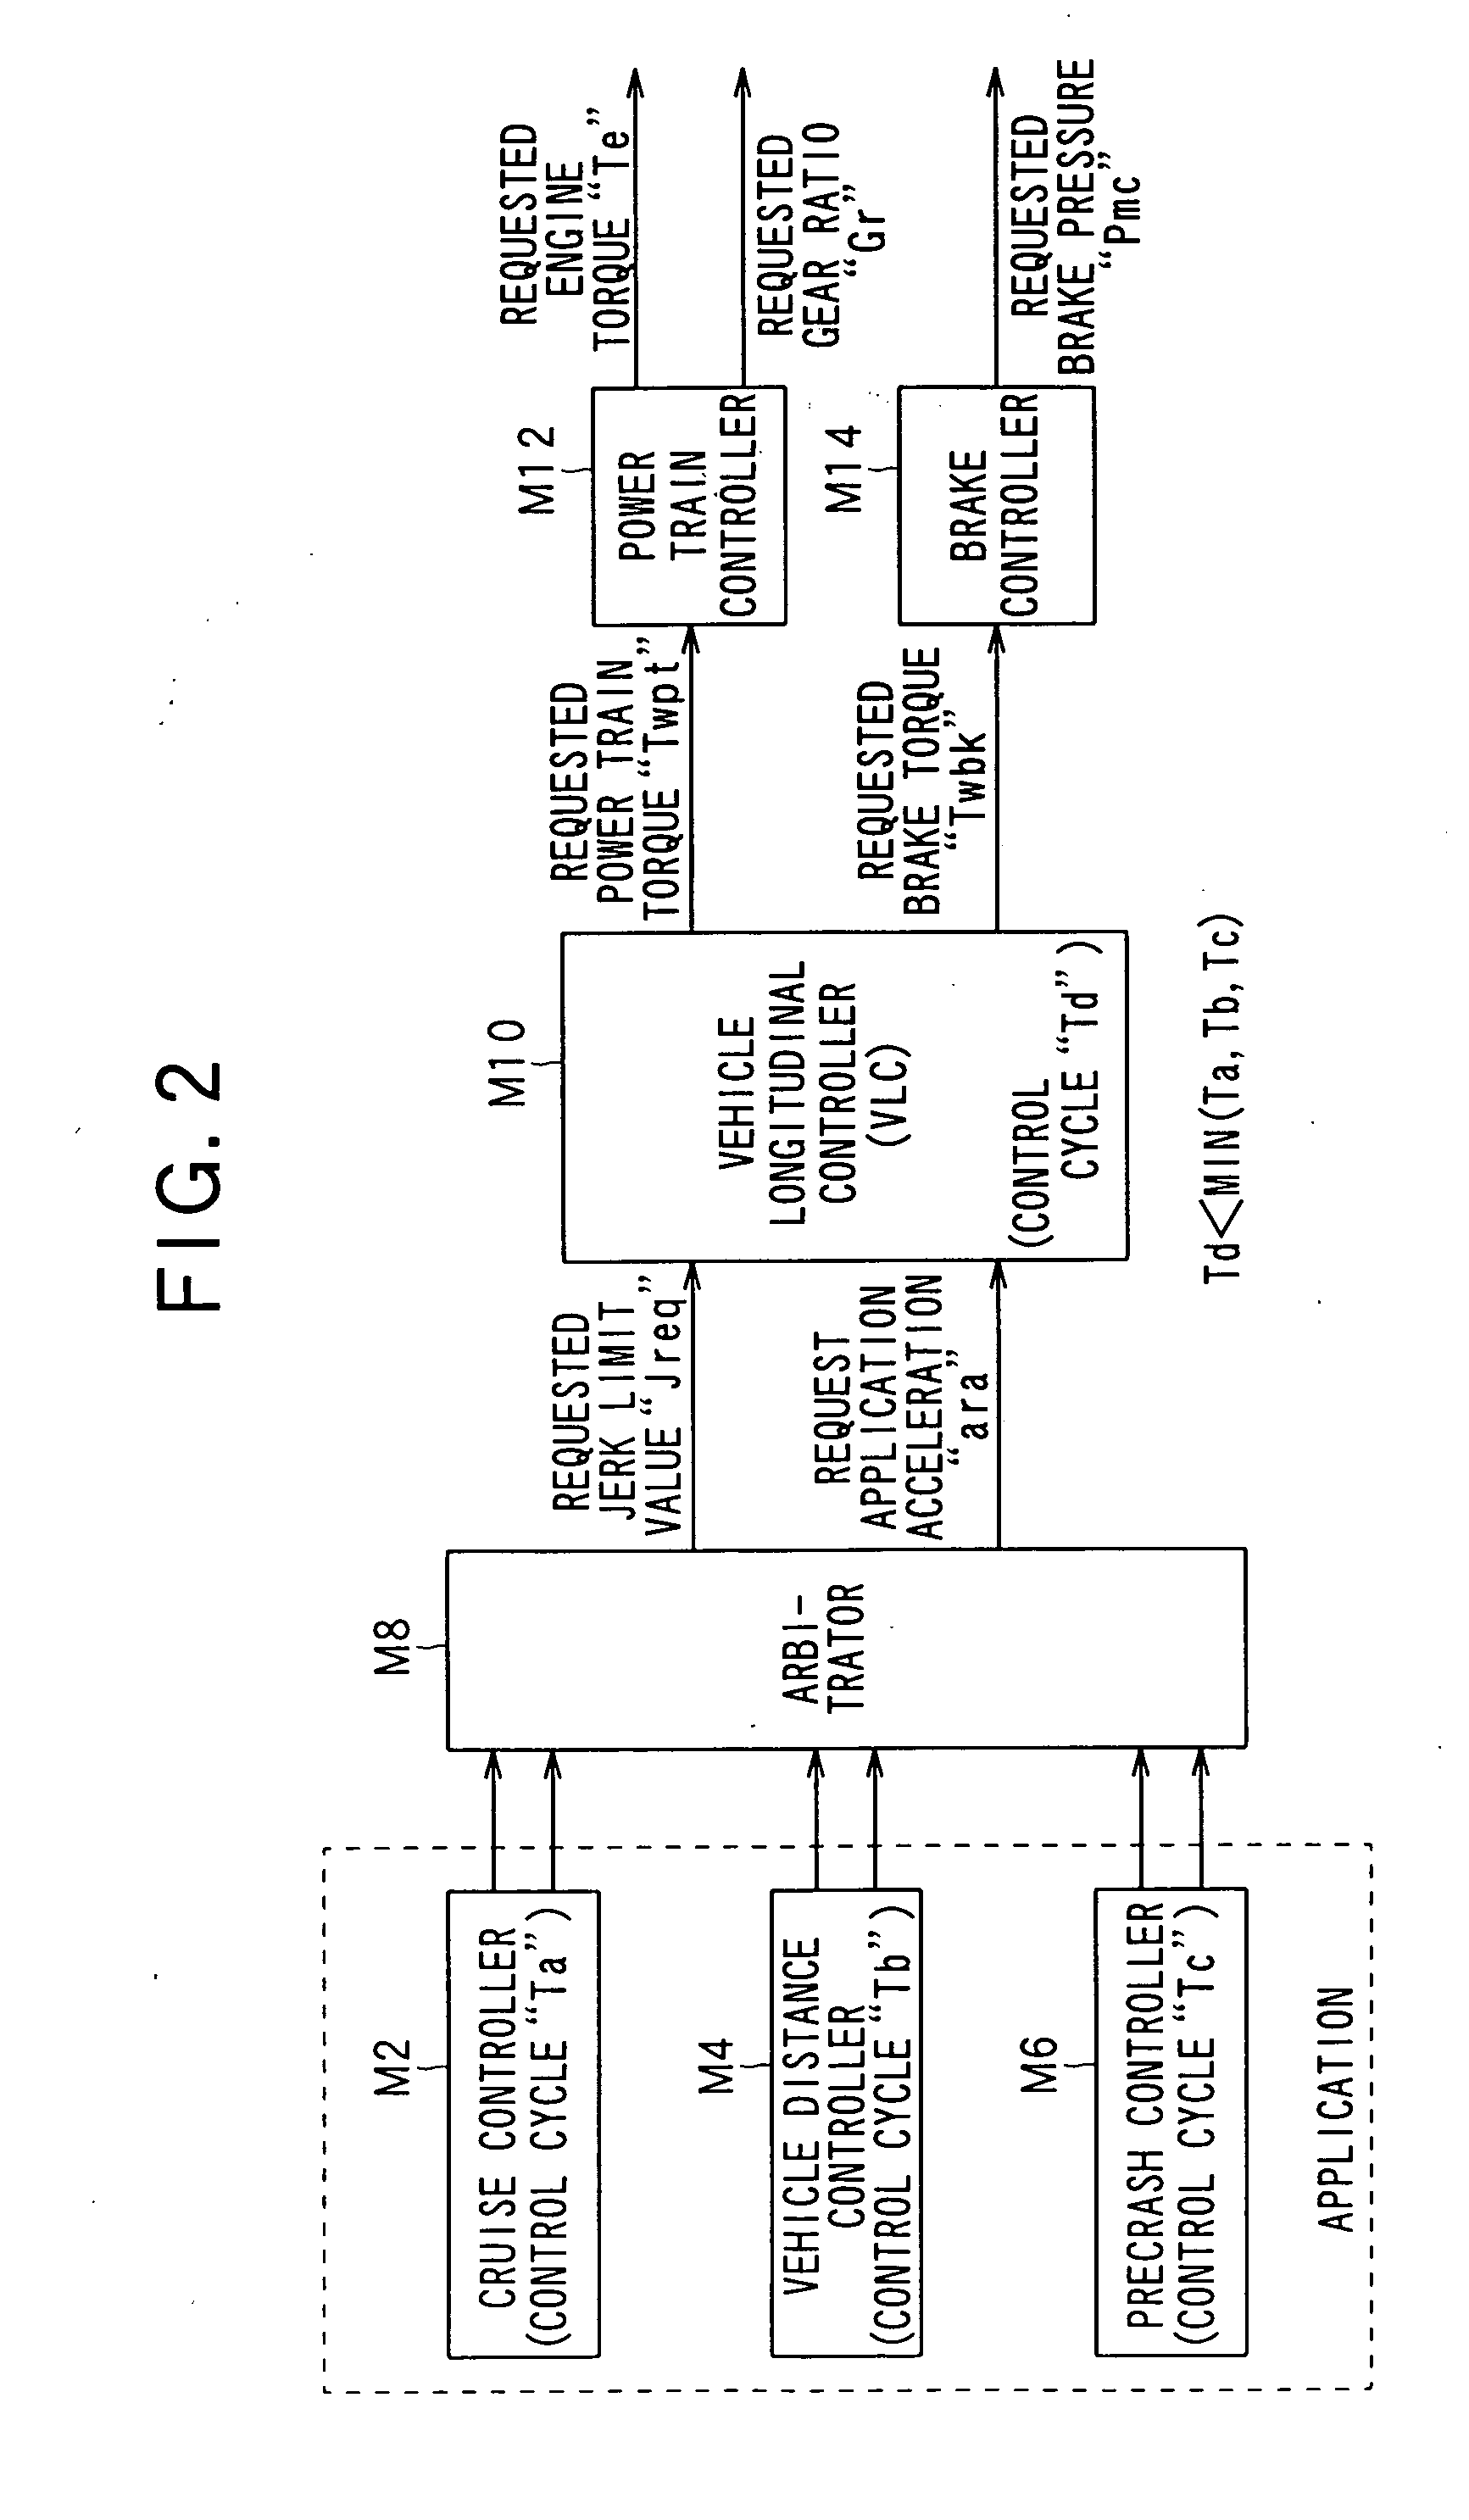 Method and apparatus for controlling acceleration of a vehicle